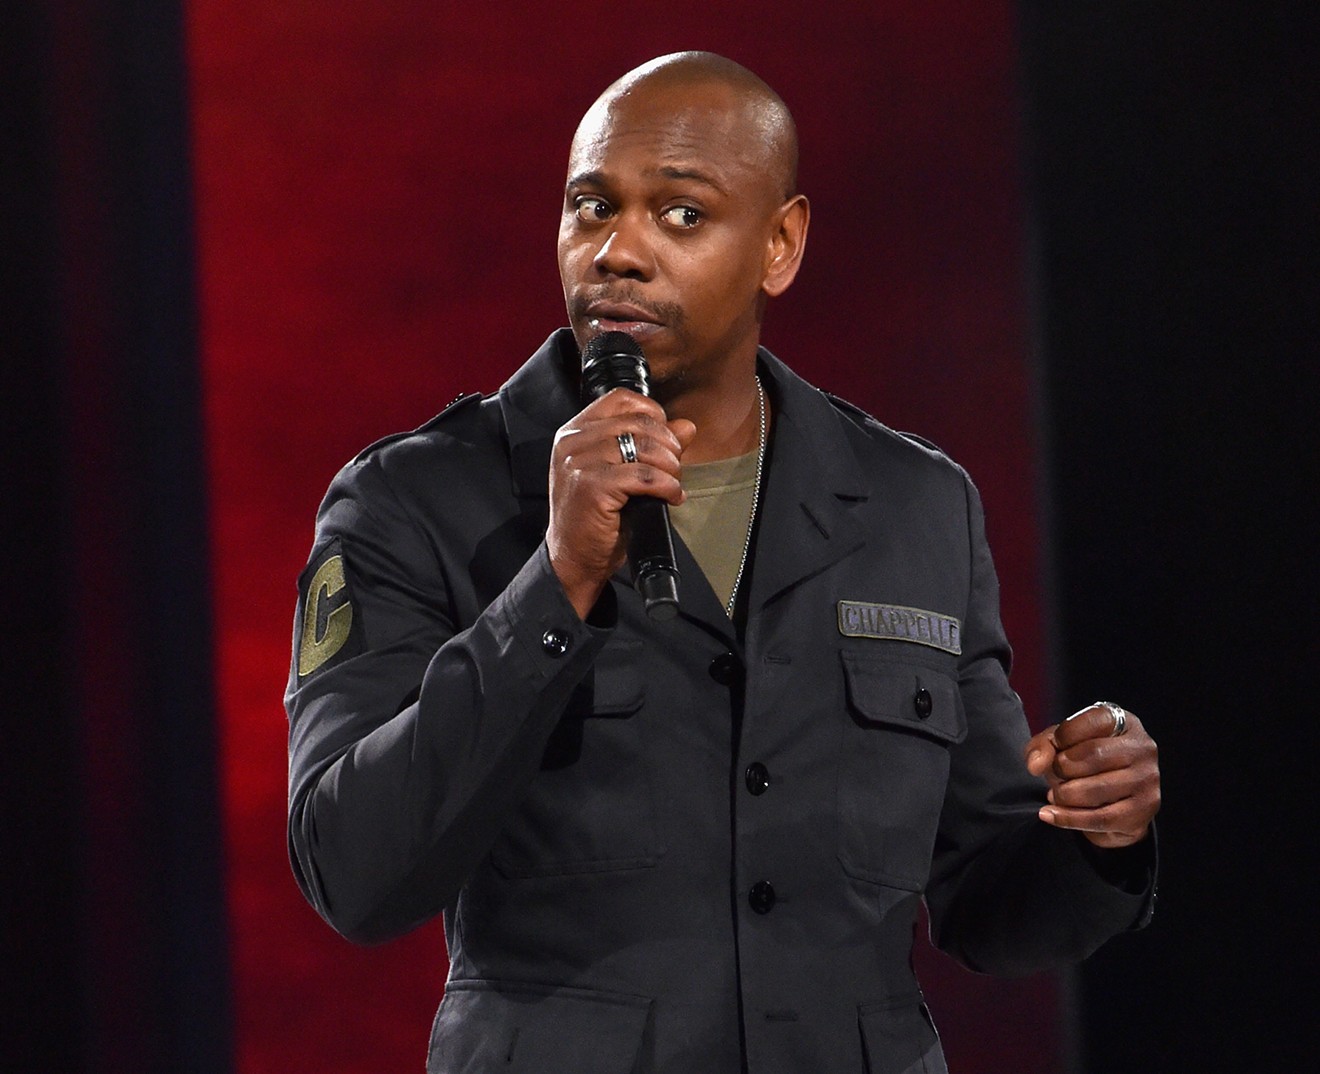 A still from Dave Chappelle's recent Netflix stand-up special.